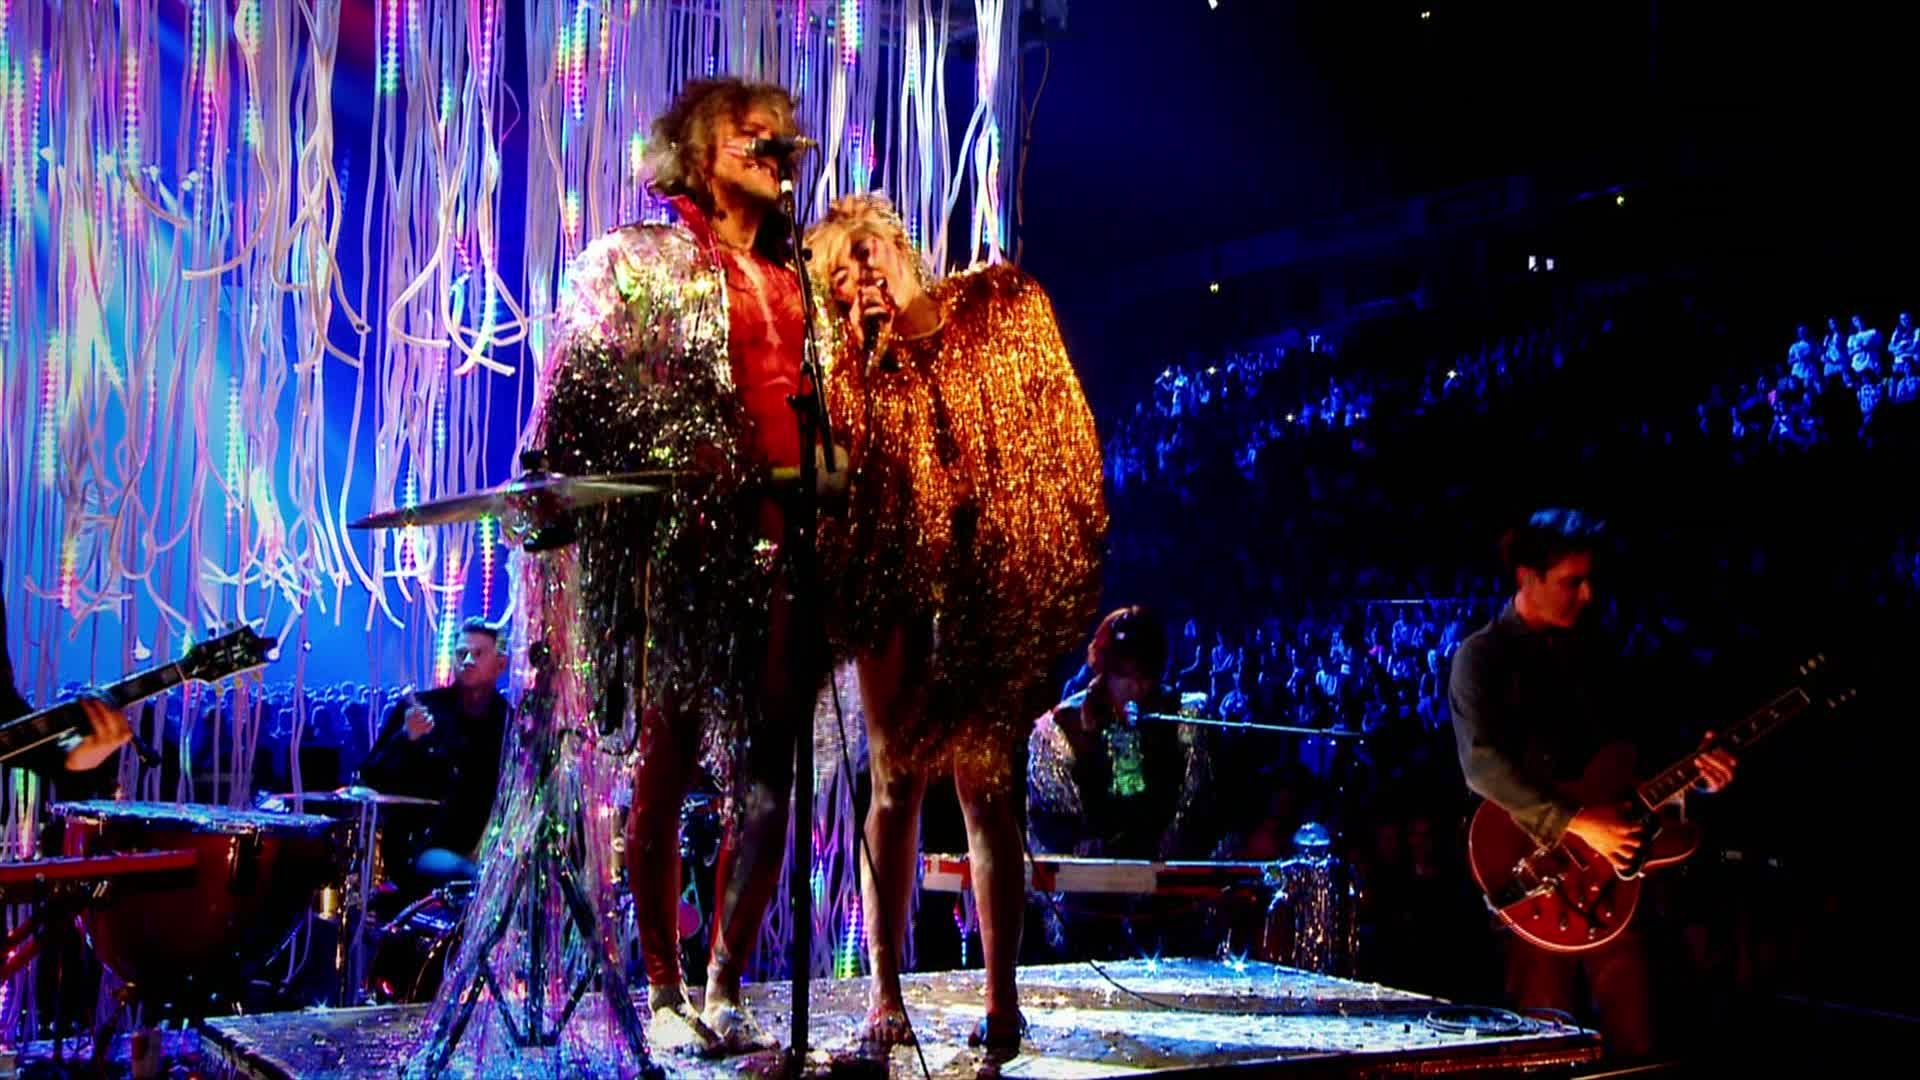 Miley Cyrus [ft The Flaming Lips] - 2014-05-18, Billboard Music Awards - 1080 TS - LSD preview 16